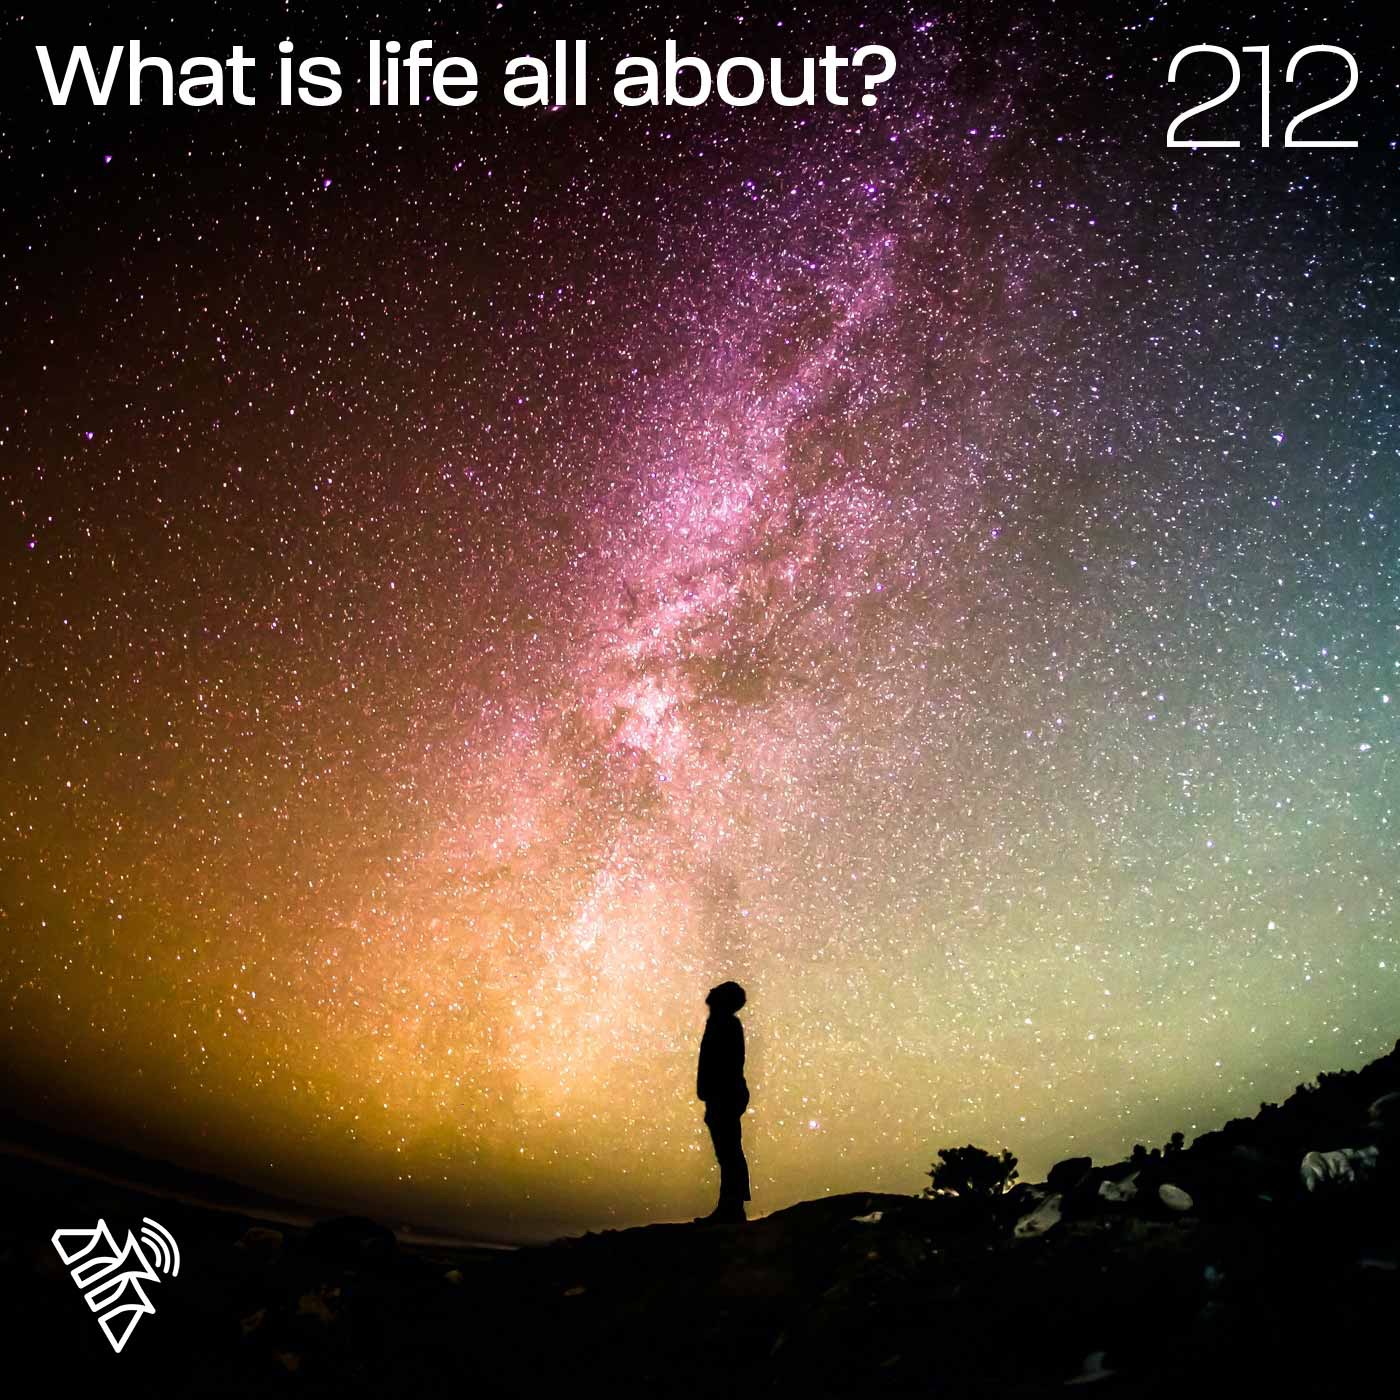 What is life all about - Pr Deane Clee - 212